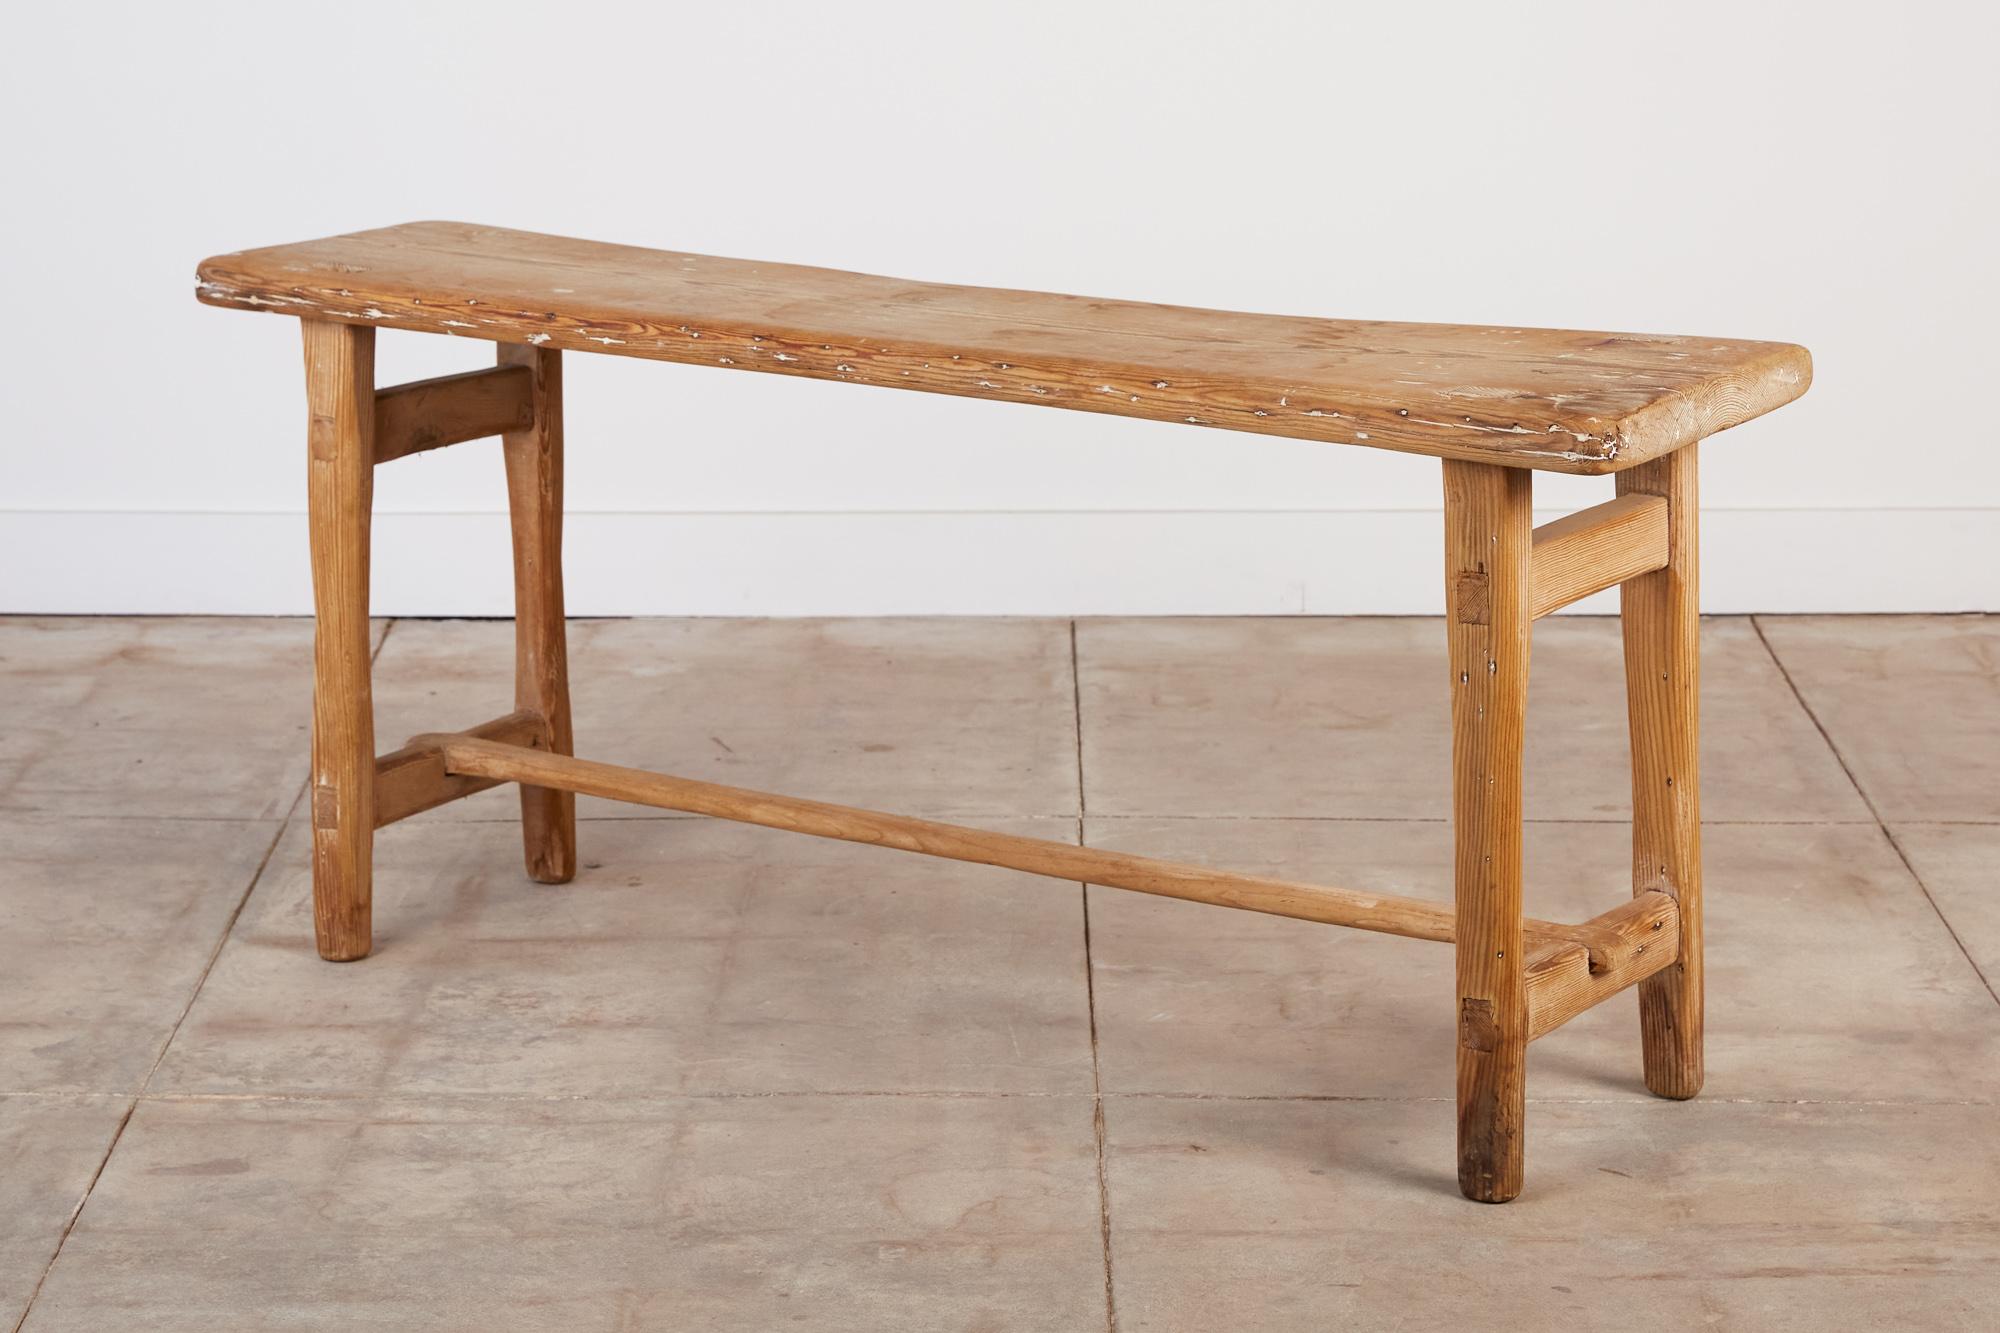 Axel Einar Hjorth style console table. The table features a patinated pine base and legs with a horizontal stretcher connecting the legs and visible joinery throughout.

Dimensions: 65.5” width x 15.75” depth x 29” height

Condition: Good